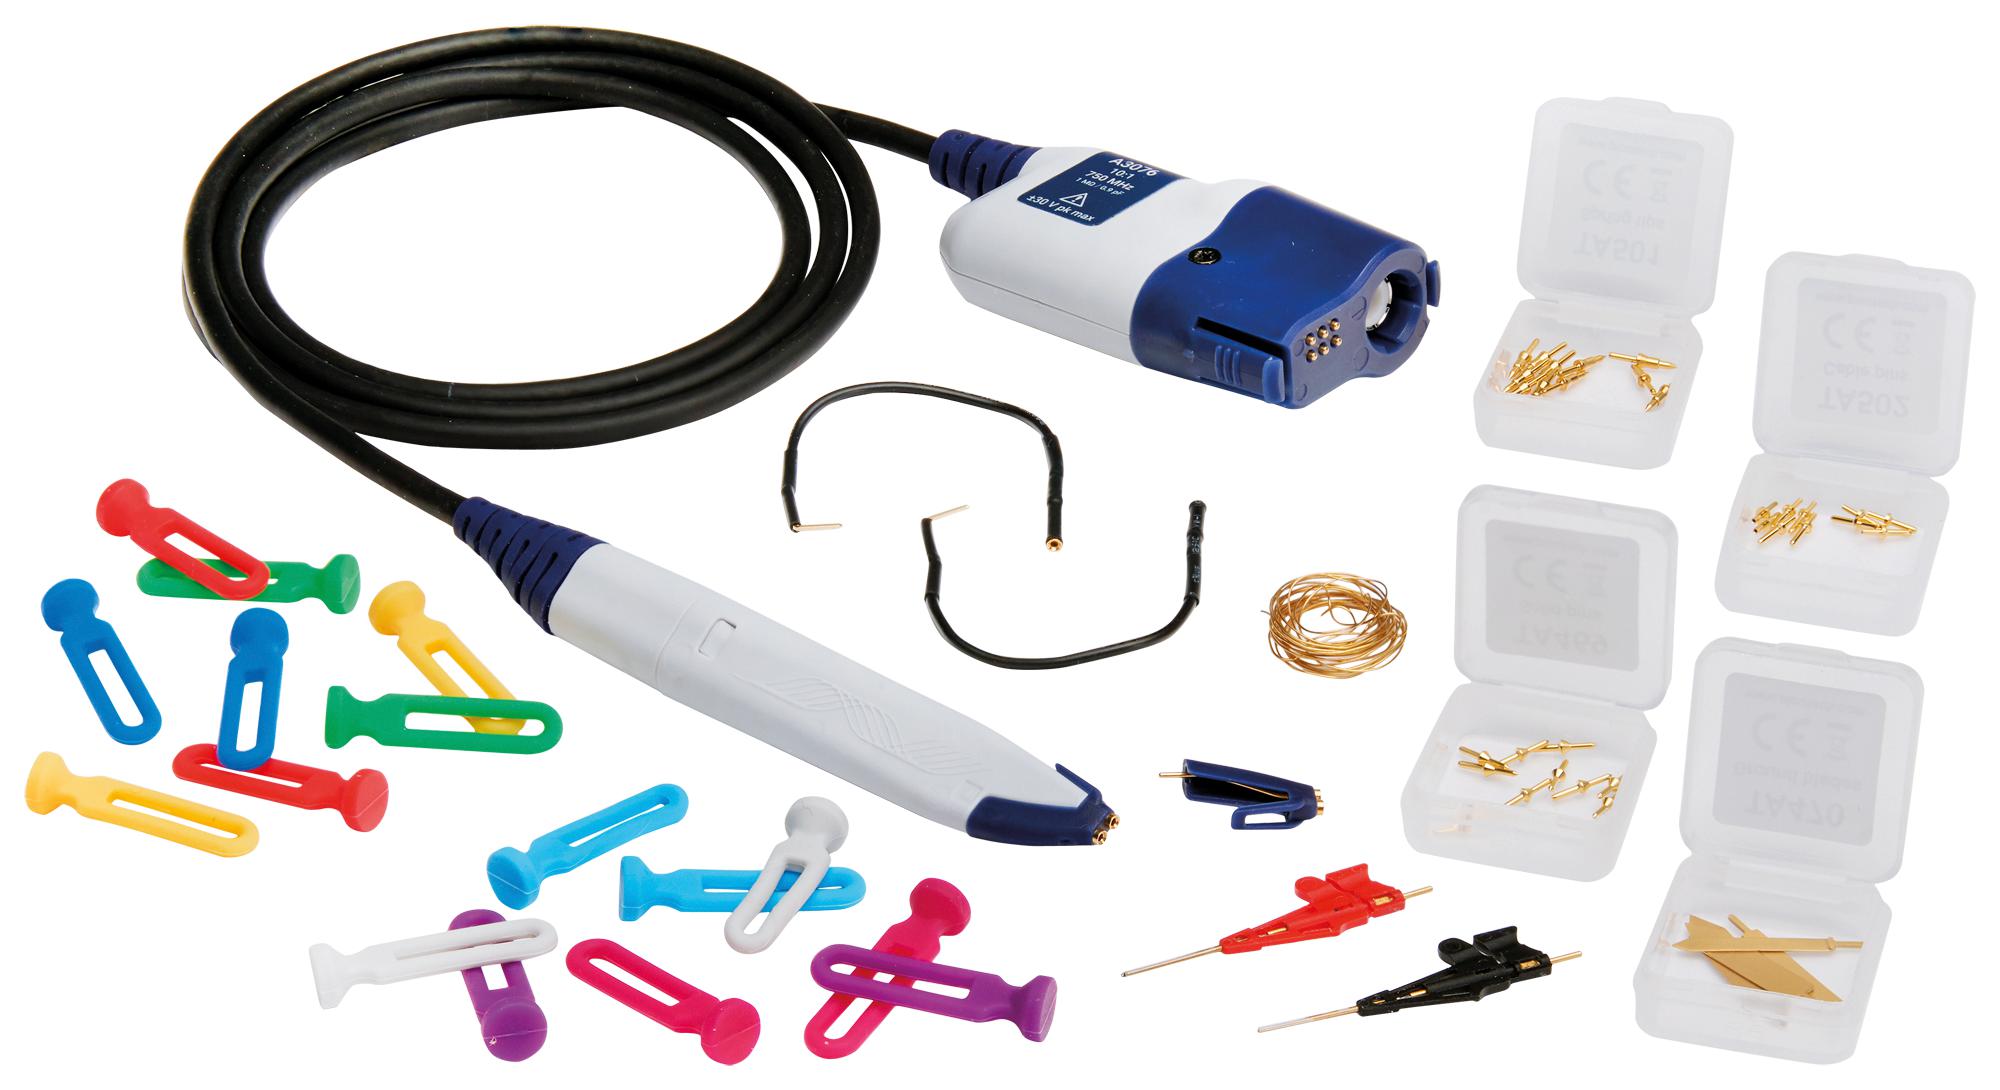 A3076 SINGLE ENDED ACTIVE PROBE KIT, 750MHZ PICO TECHNOLOGY